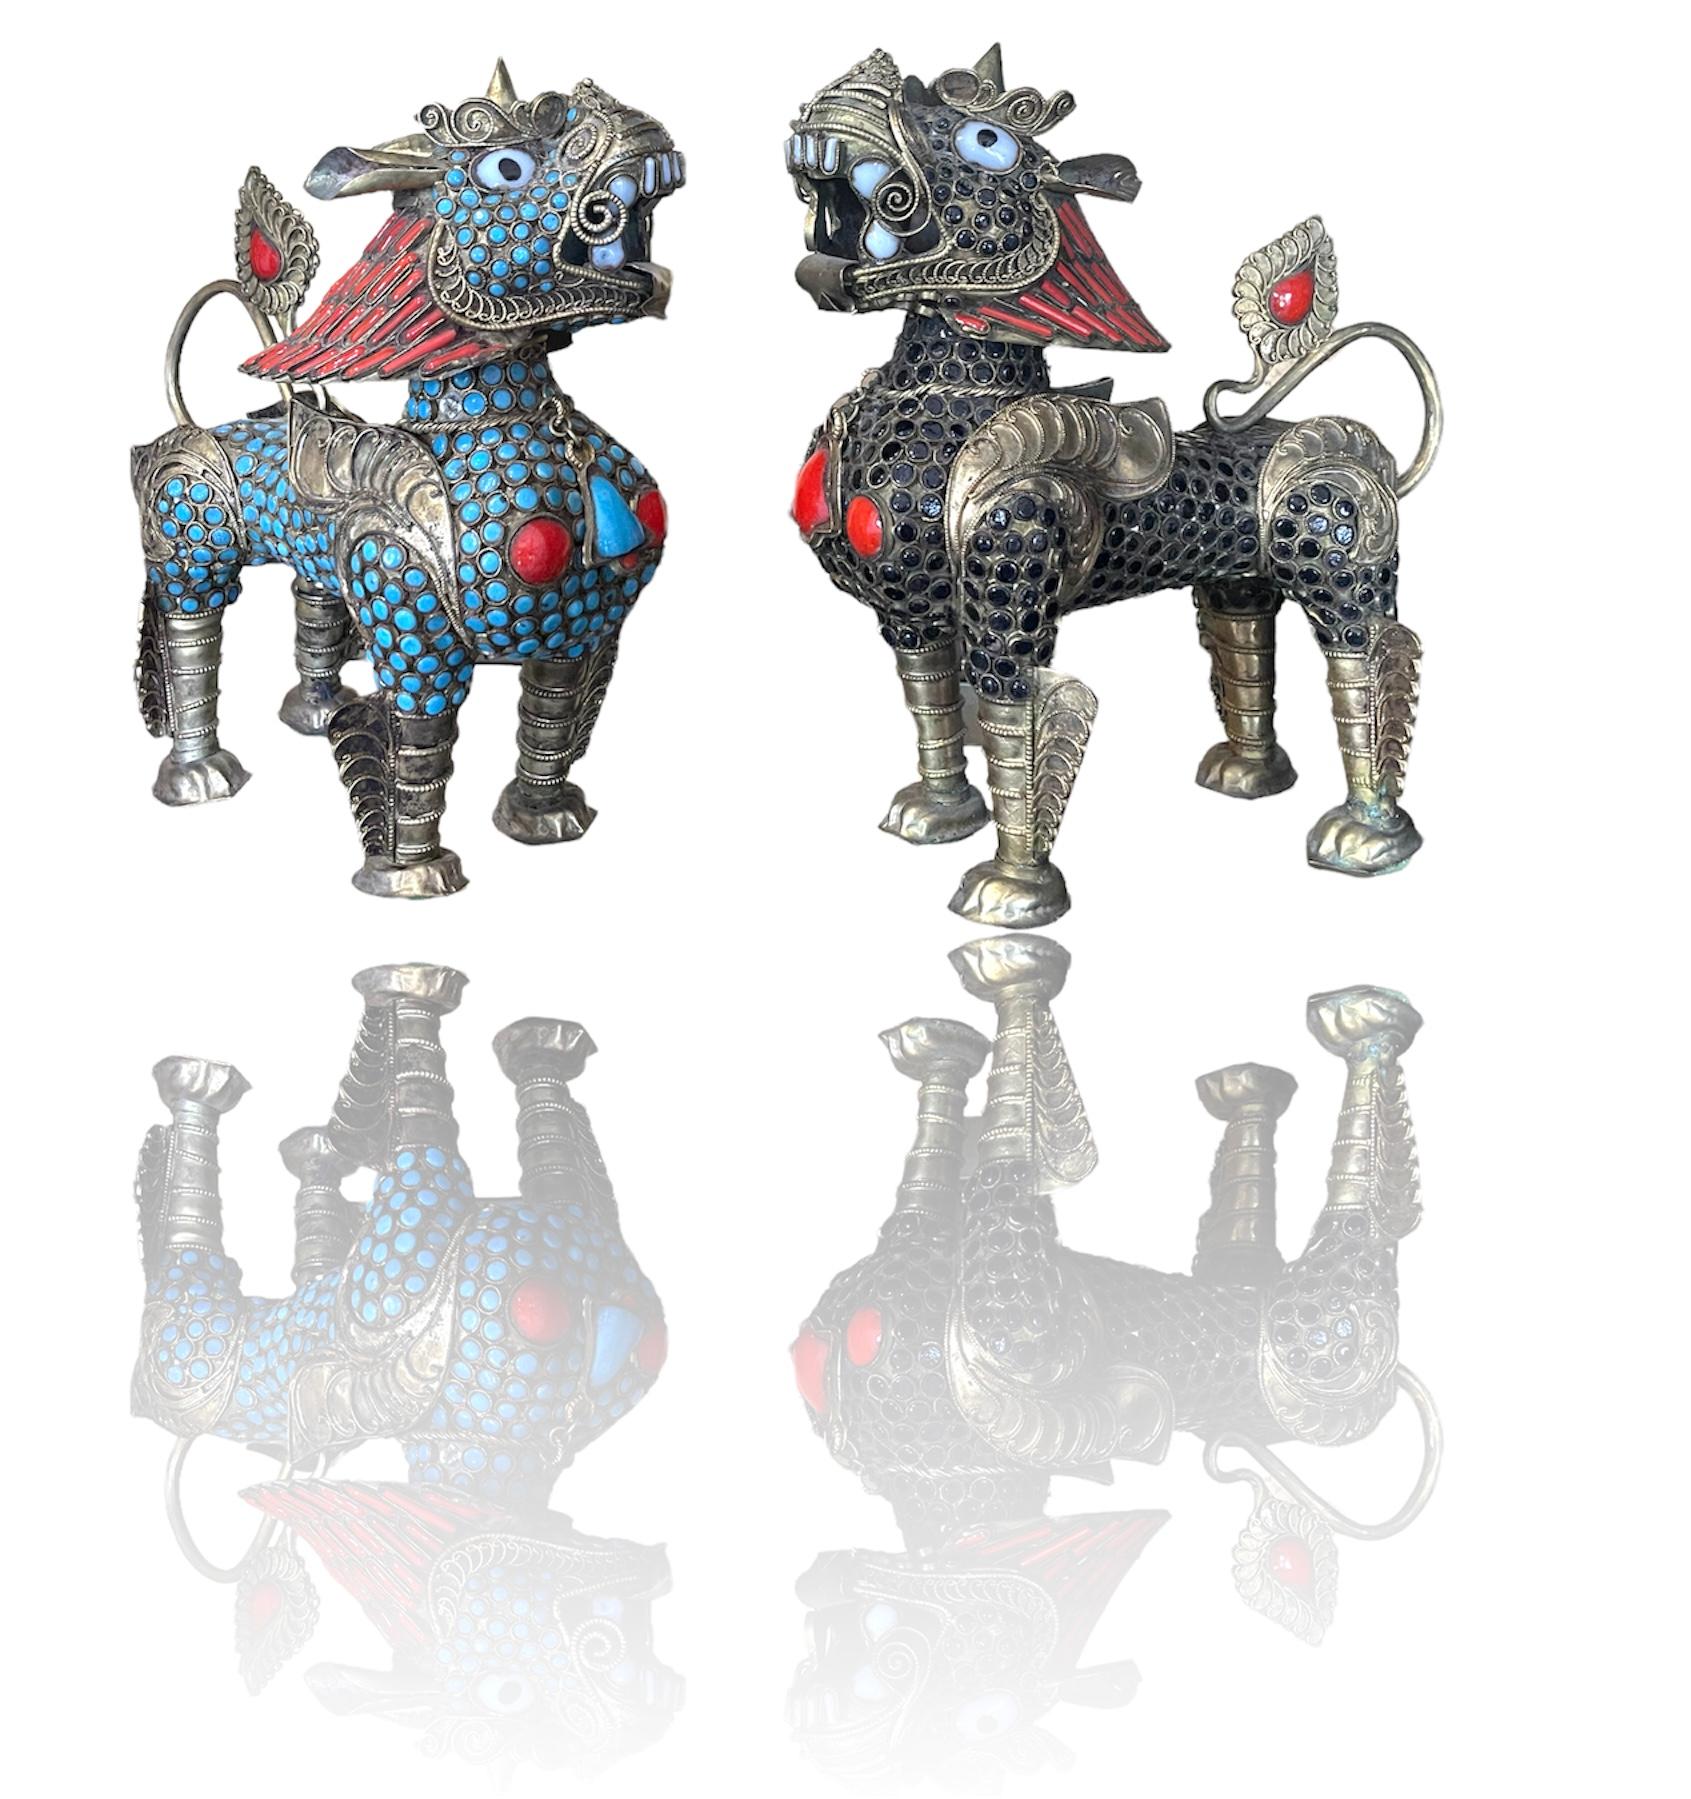 Intricately detailed pair of hand crafted metal Tibetan foo dog incense burners. Each foo has been covered in dozens of red, black and turquoise faux stones by hand. The heads are removable in order to insert incense .There is some age in patina and